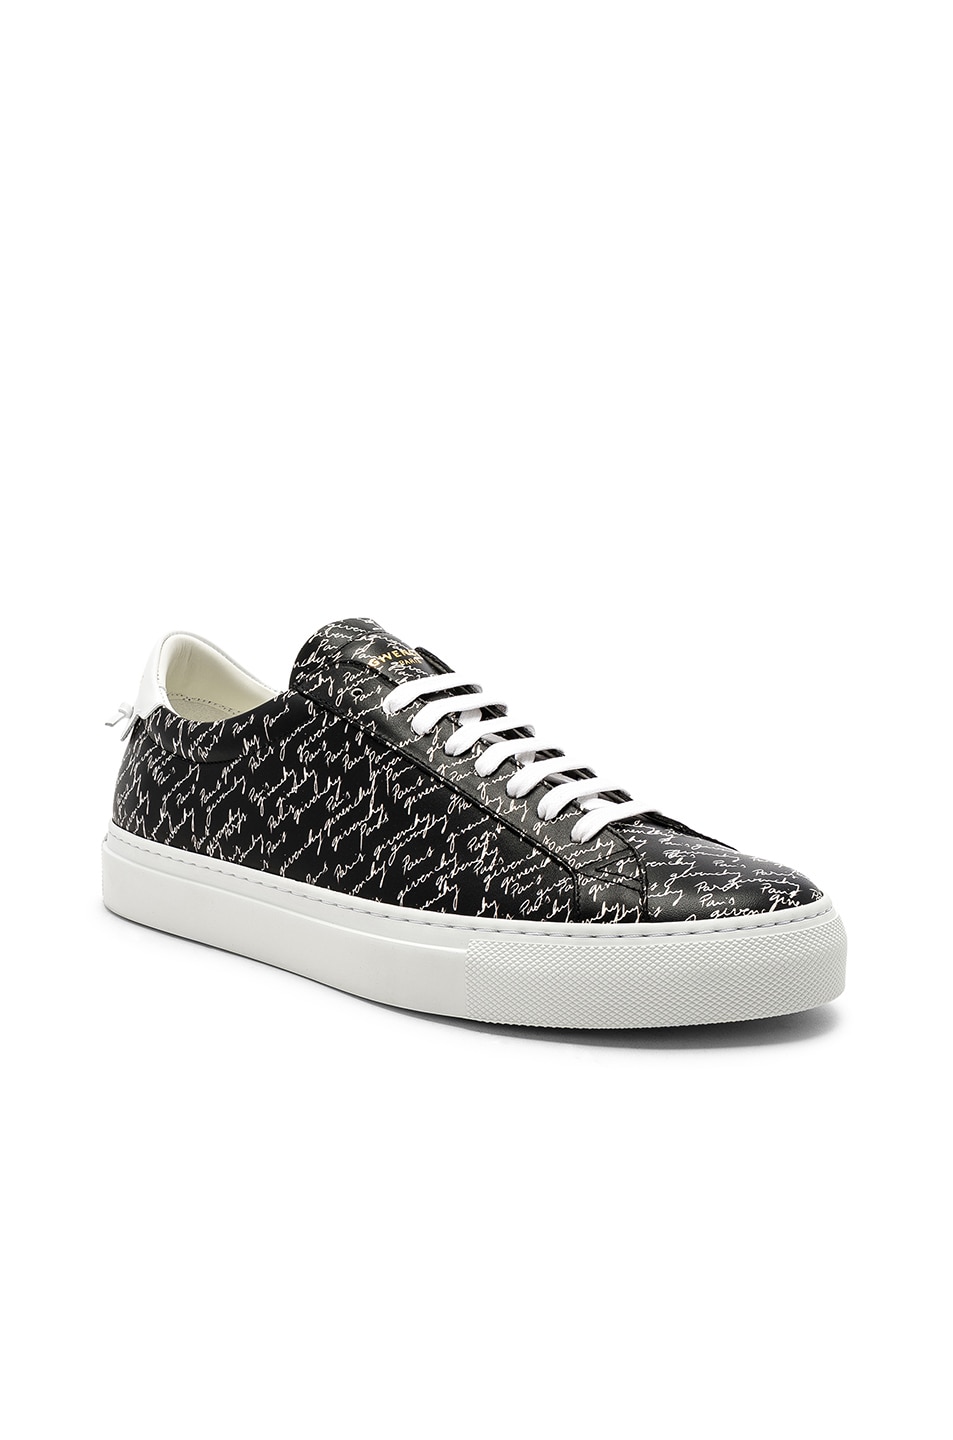 Image 1 of Givenchy Leather Urban Street Sneakers in Black & White